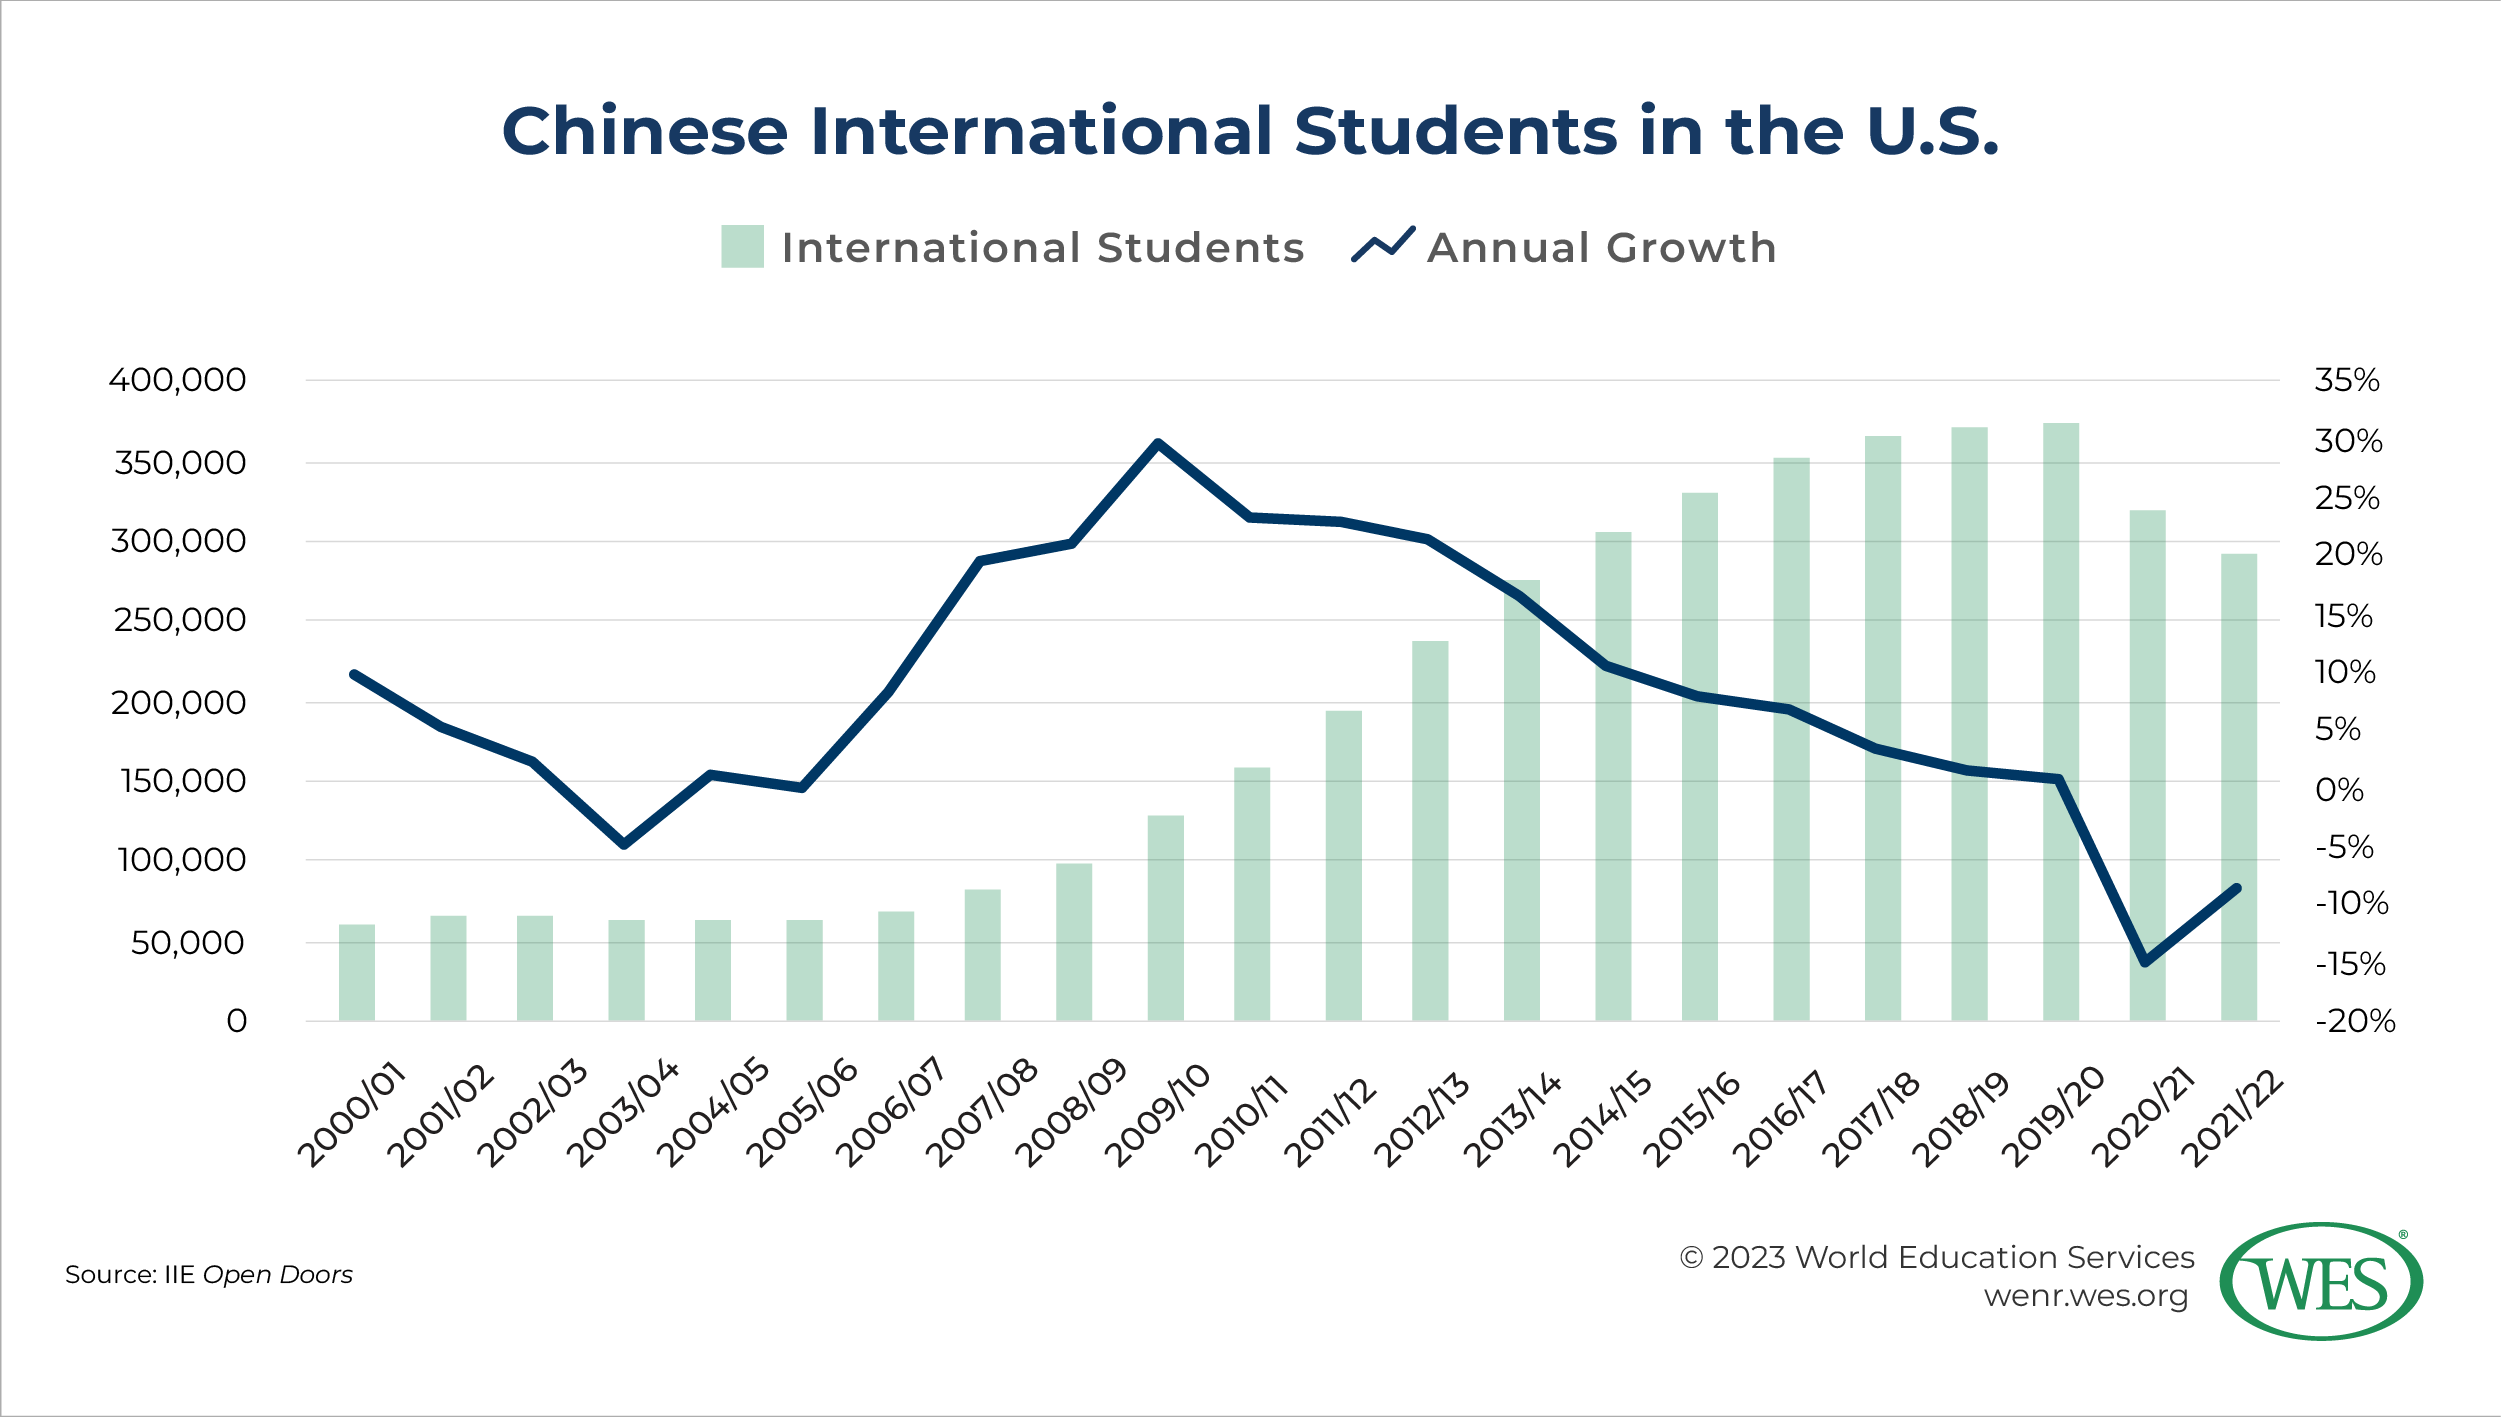 A chart showing the annual number of Chinese international students in the U.S. between 2000/01 and 2021/22. 